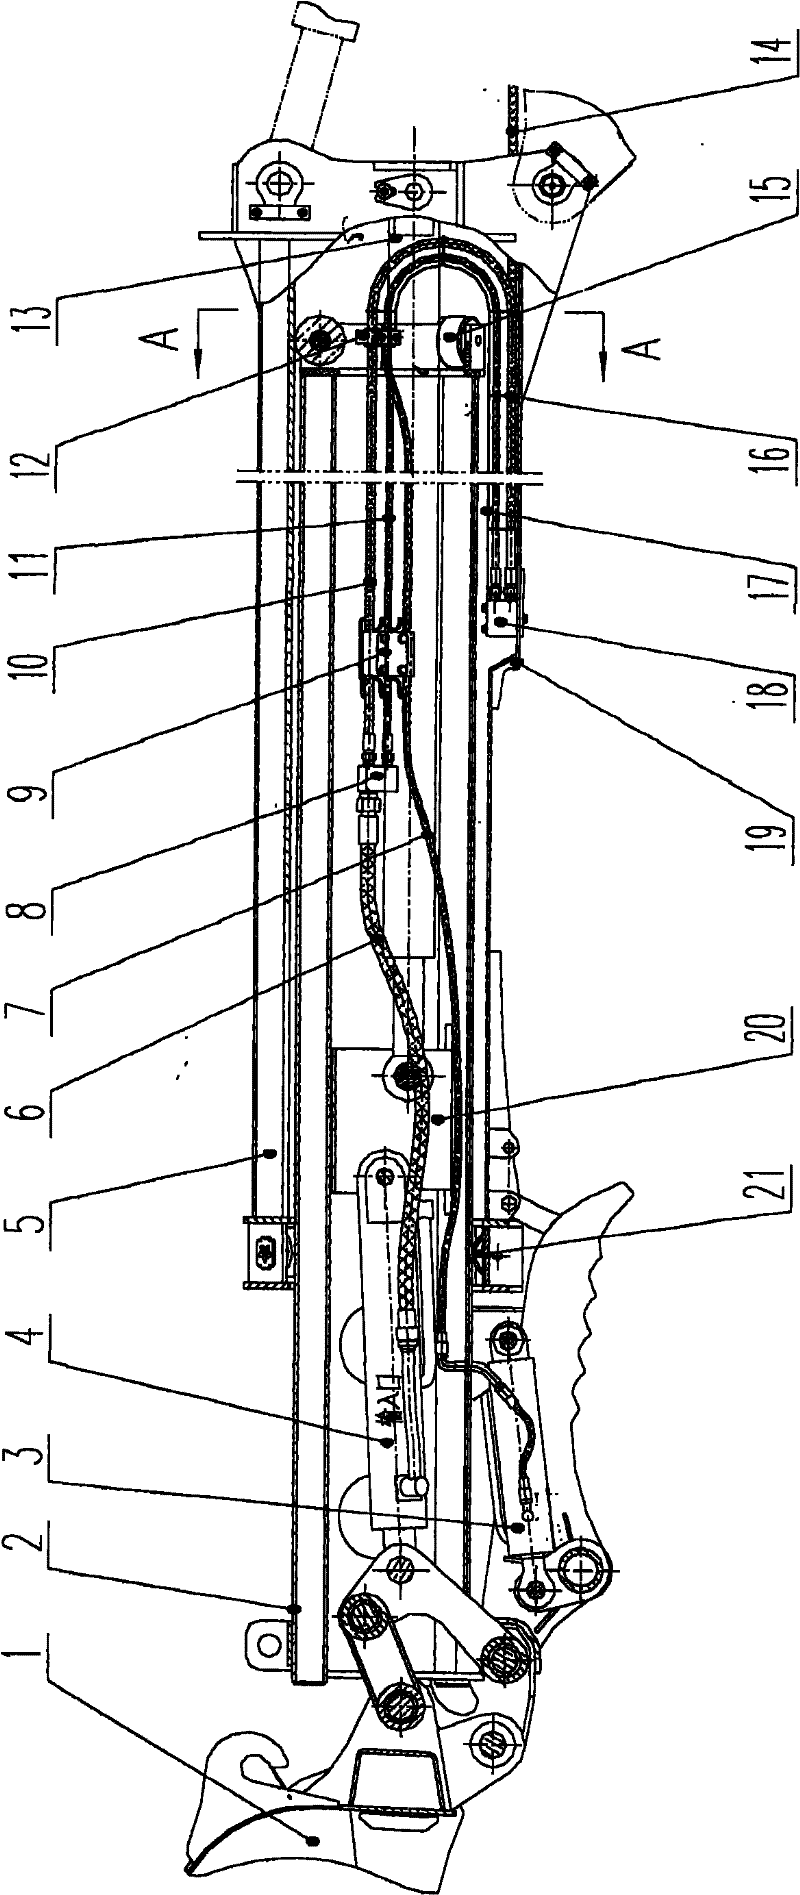 Follow-up mechanism for telescopic digging arm hydraulic pipeline